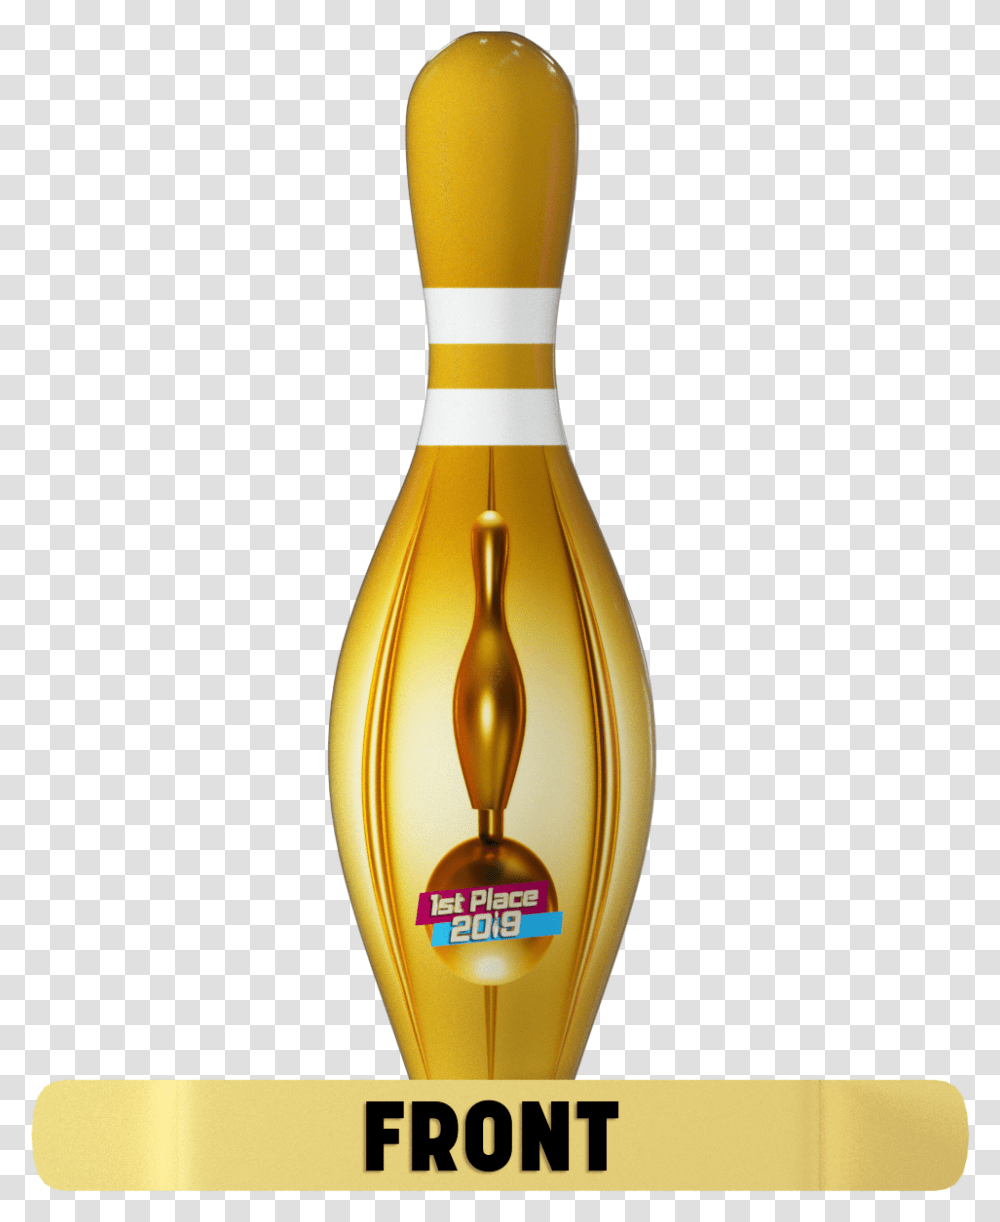 Gold Pin 1st Place Ten Pin Bowling, Beverage, Drink, Alcohol, Spoon Transparent Png